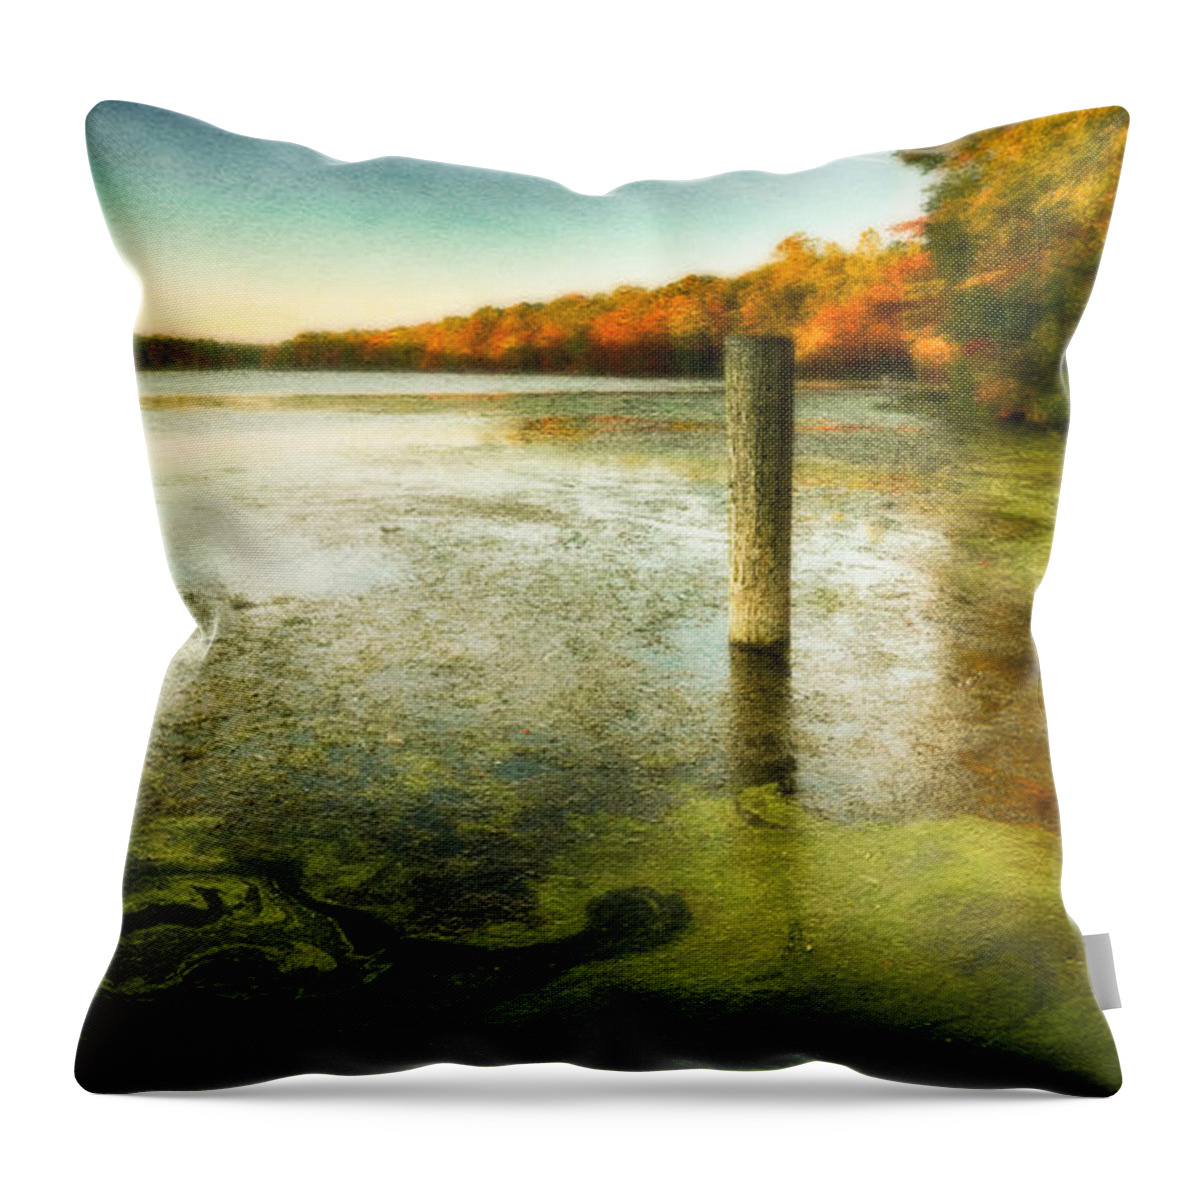 Blydenberg Park Throw Pillow featuring the photograph Blydenberg Park in the Fall by Alissa Beth Photography